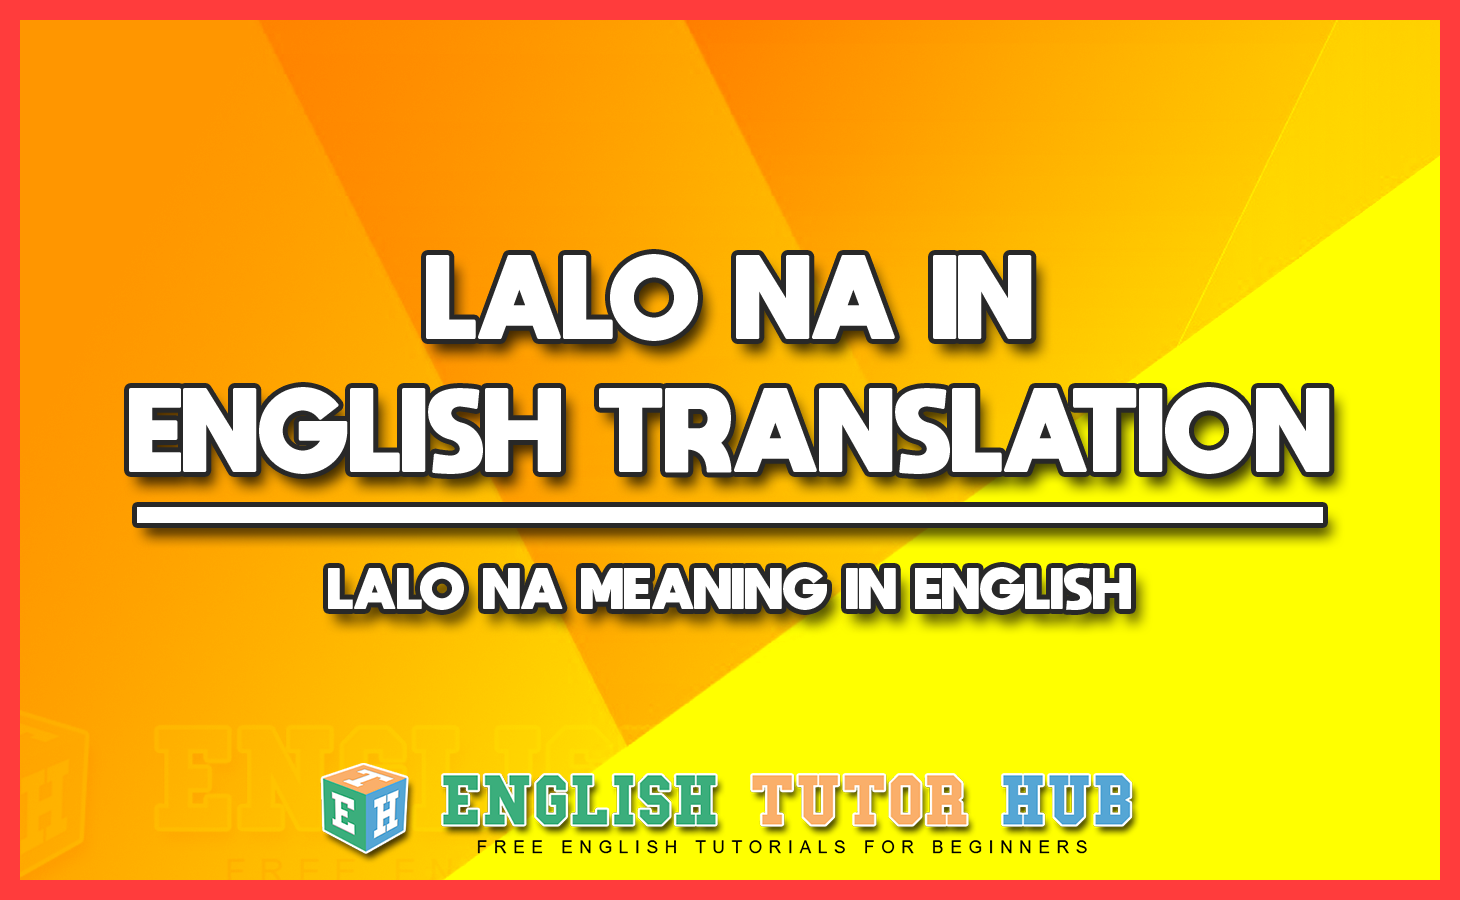 LALO NA IN ENGLISH TRANSLATION - LALO NA MEANING IN ENGLISH